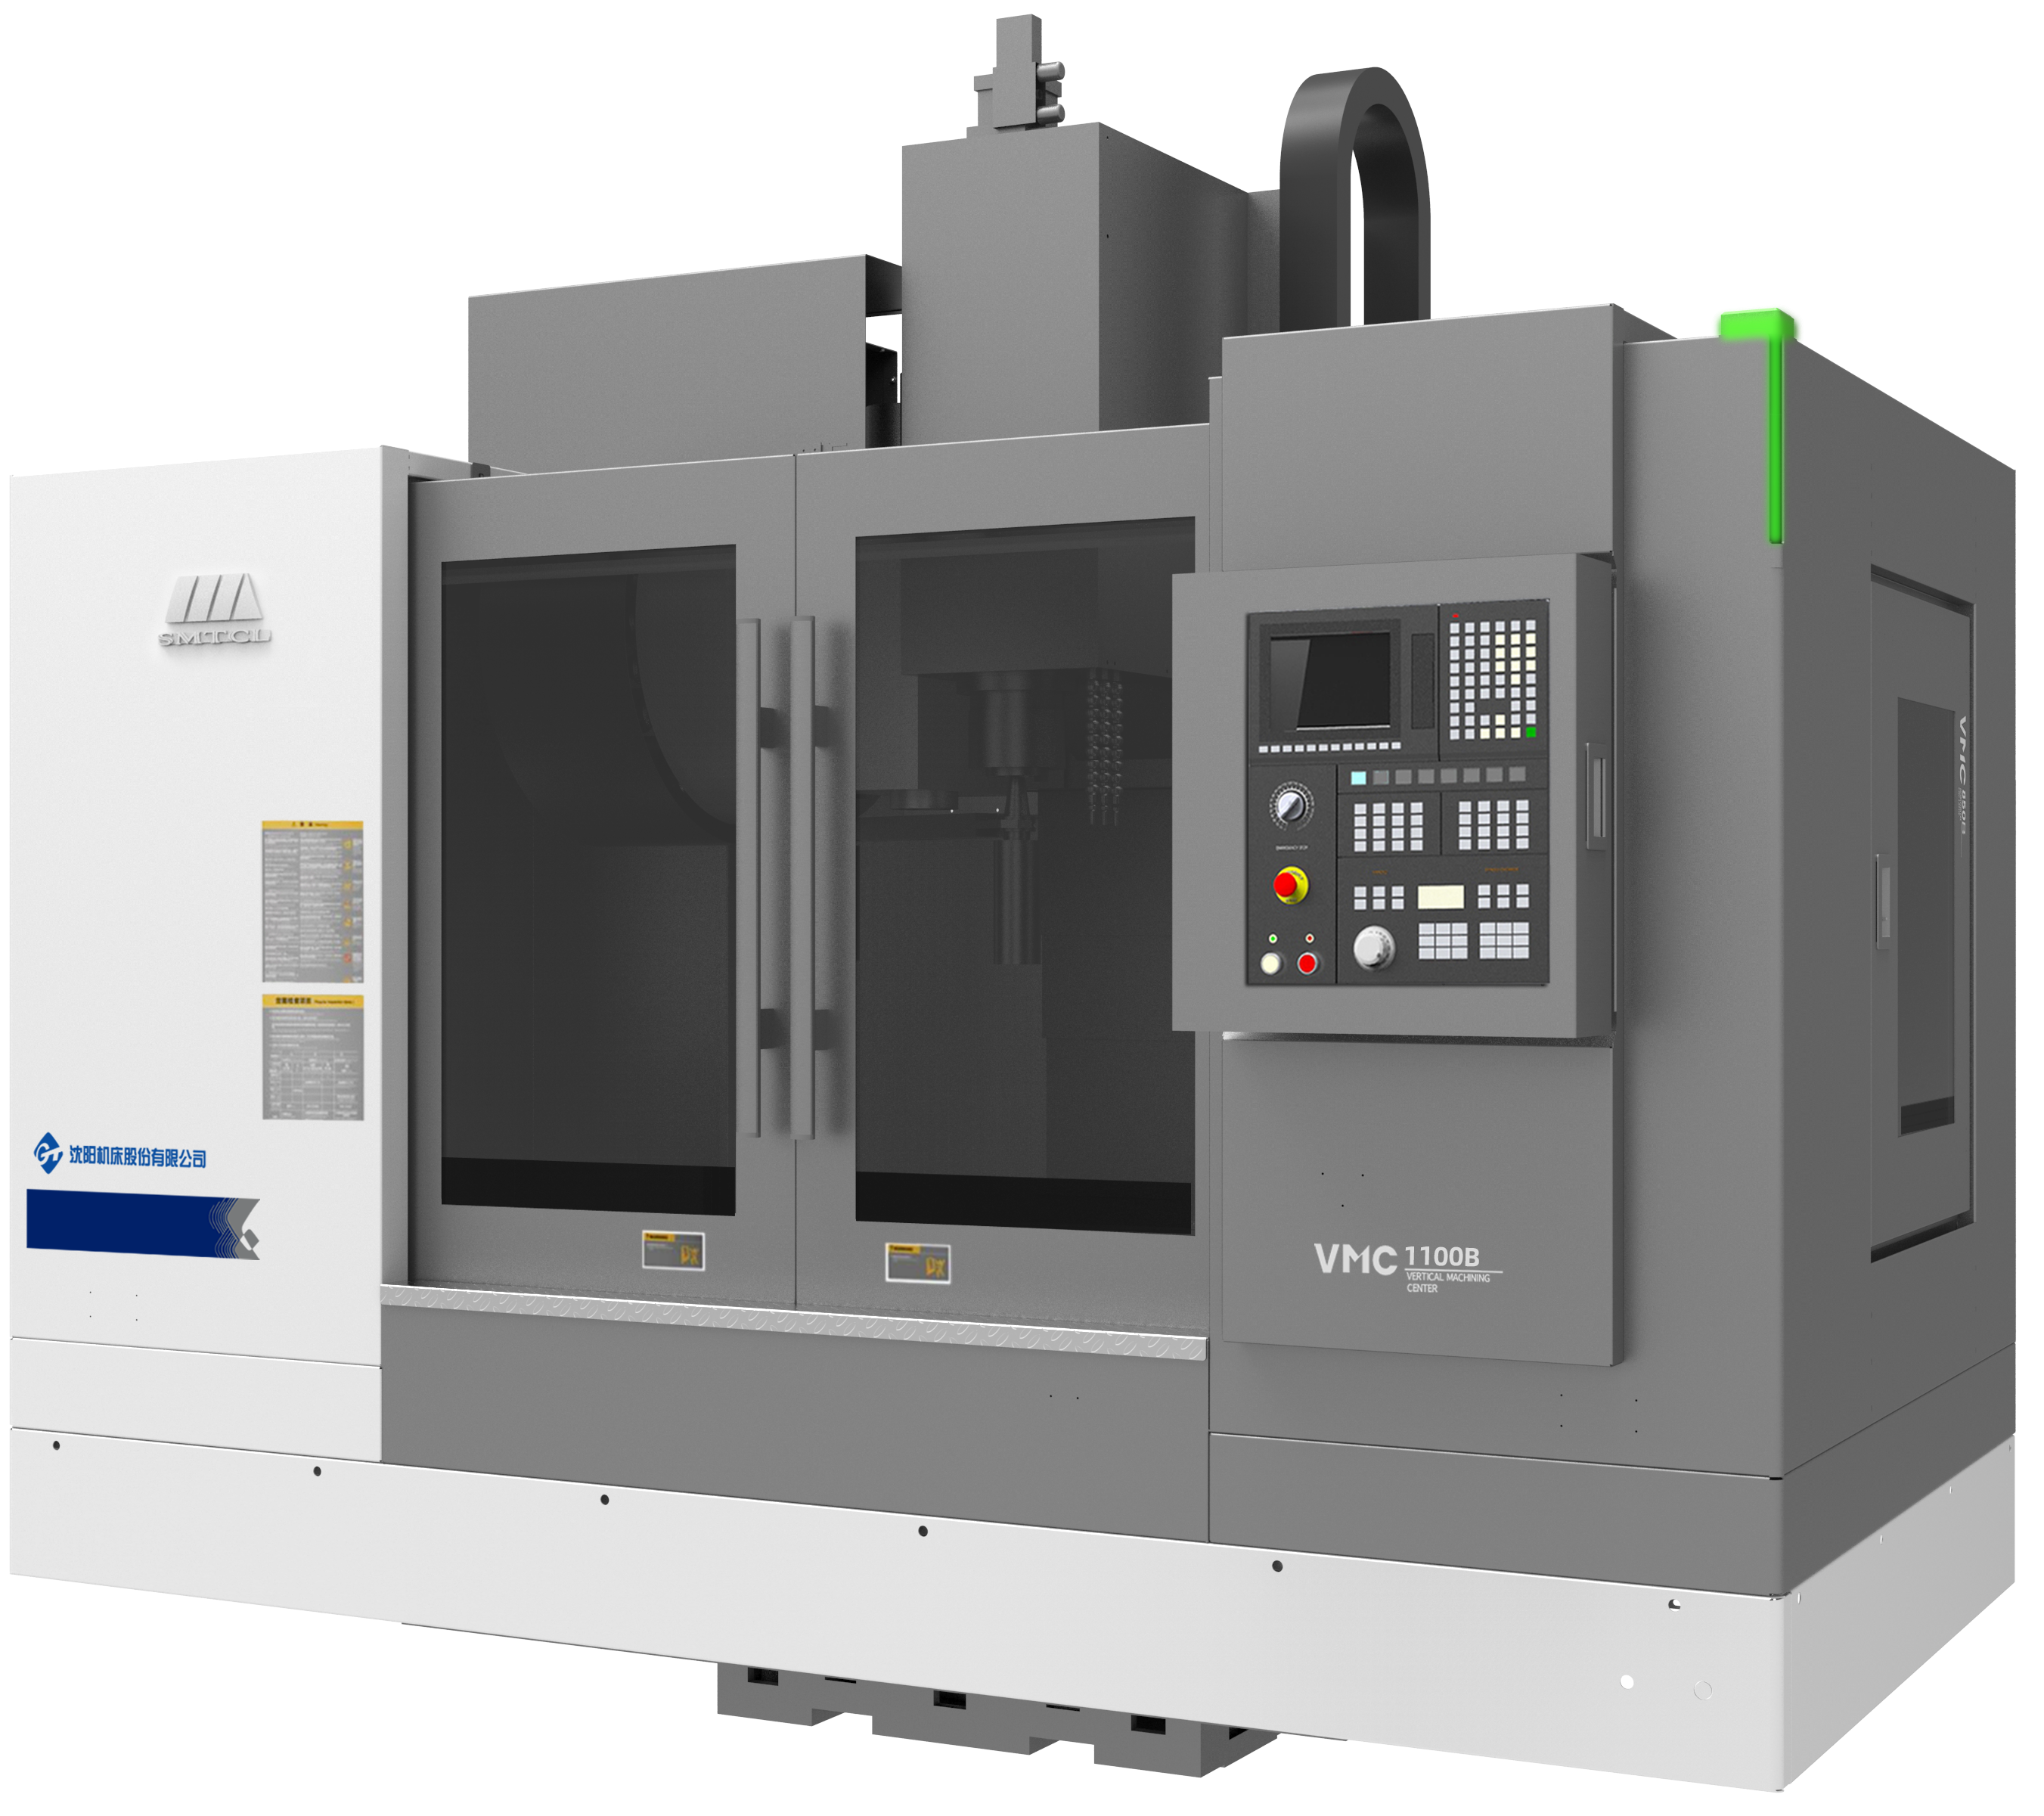 Solutions for overcutting and mis-centering of workpieces on vertical machining centres